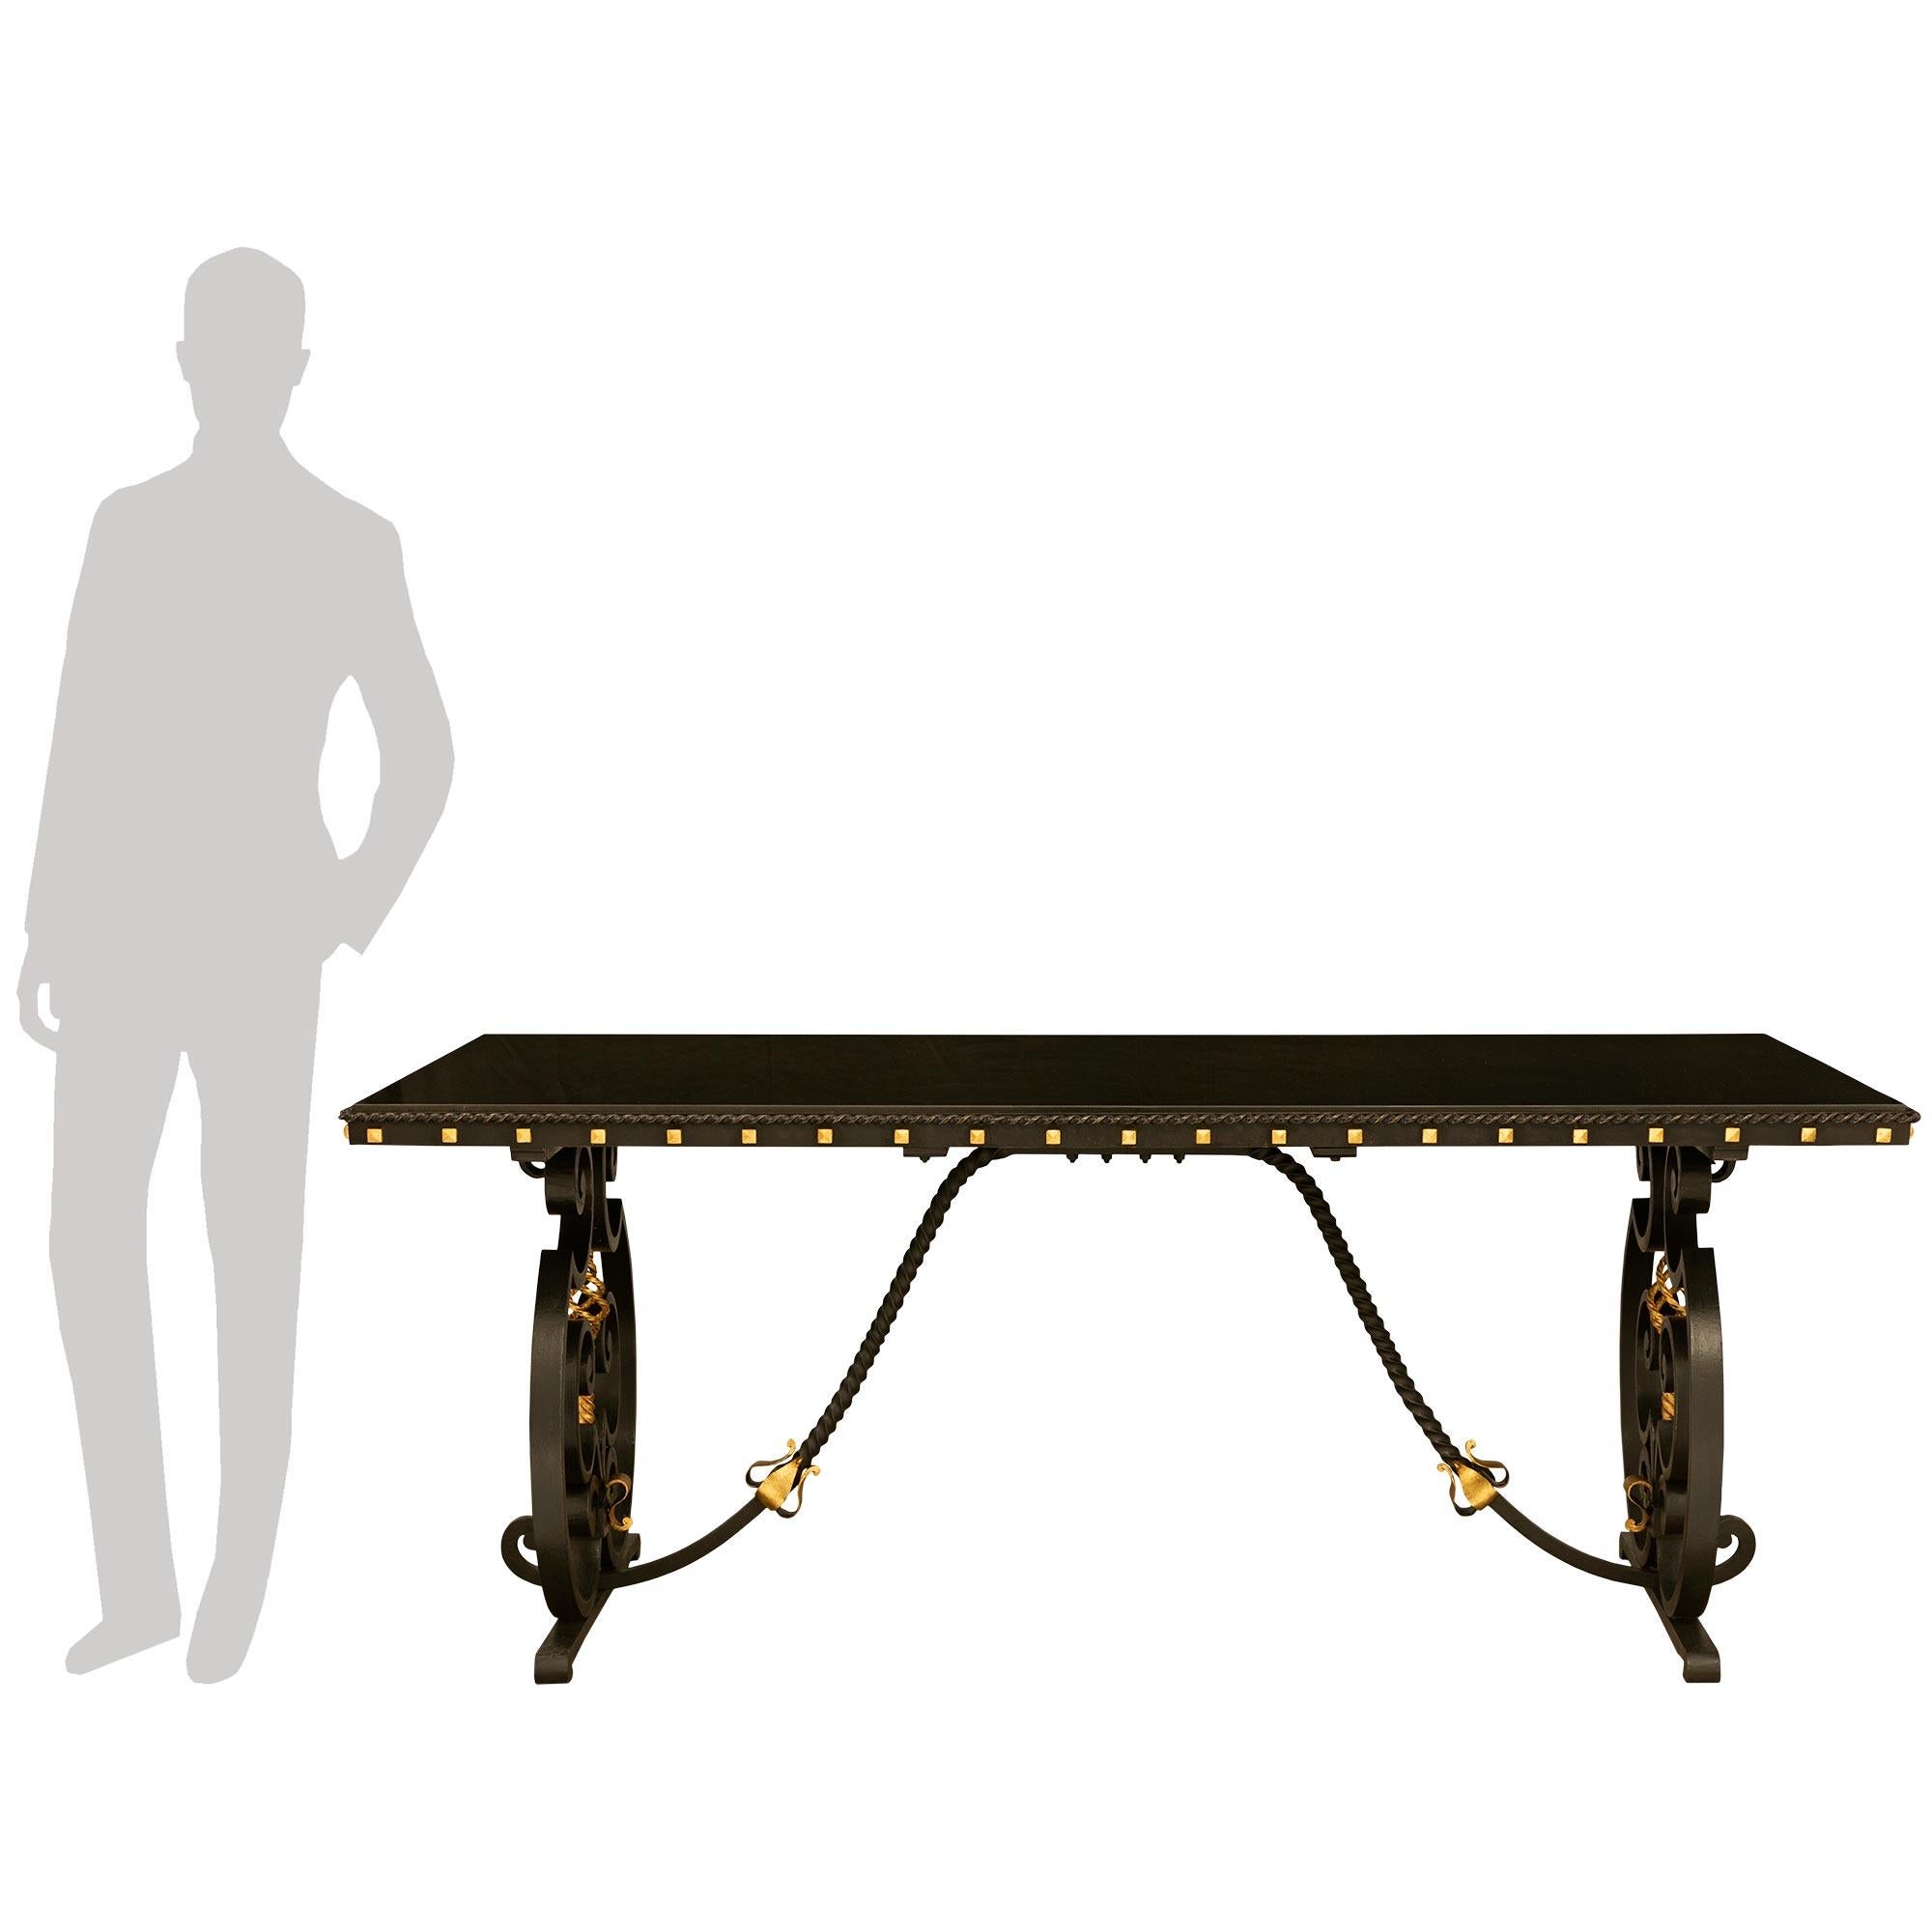 An impressive and handsome French 19th century Wrought Iron and Gilt center table. The table is raised by thick double scrolled iron supports flanking the central reserve with a gilt spiral and twisted stem. The two supports are joined by twisted